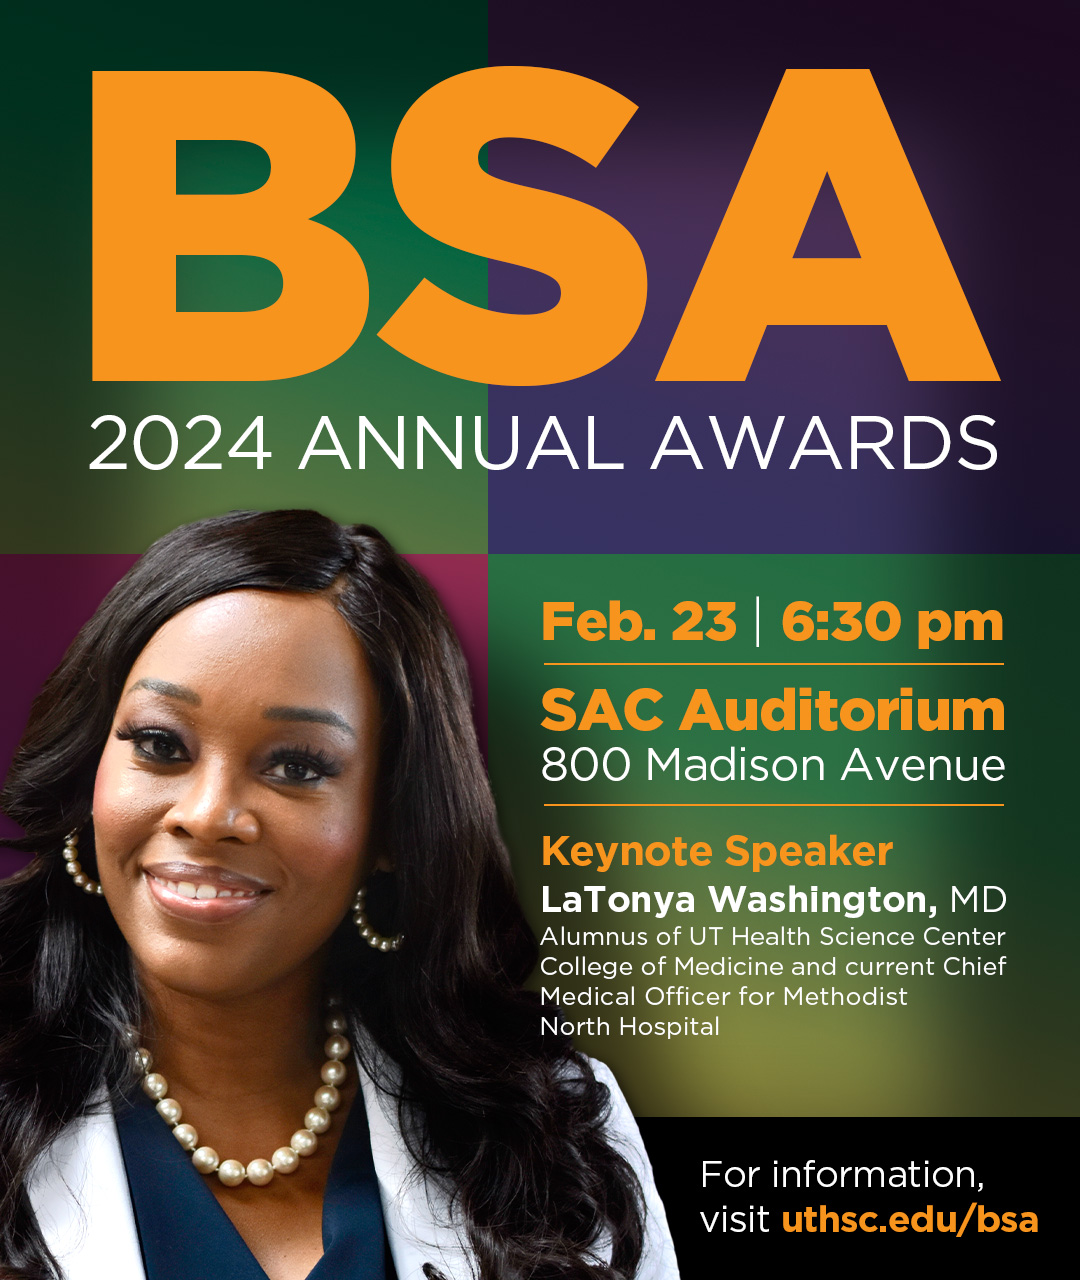 BSA 2024 Annual Awards Ceremony will take place February 23th at 6:30 pm.